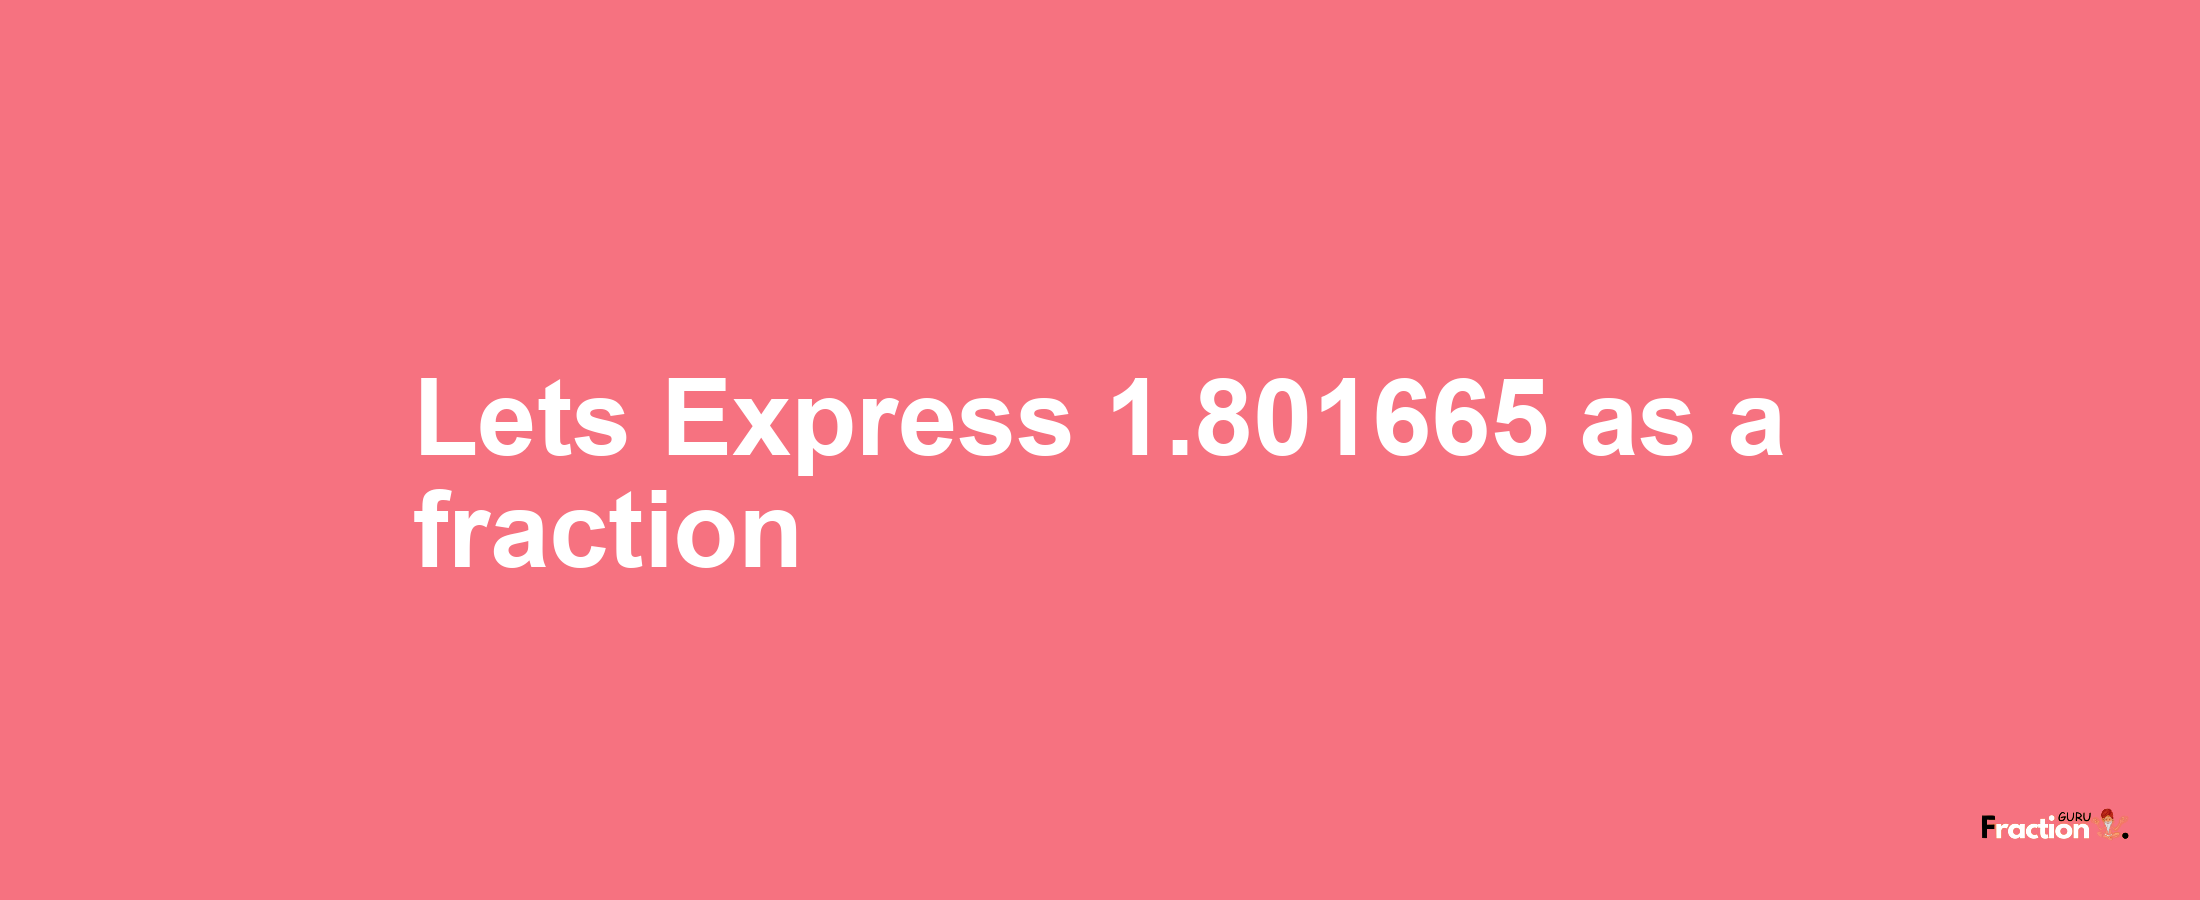 Lets Express 1.801665 as afraction